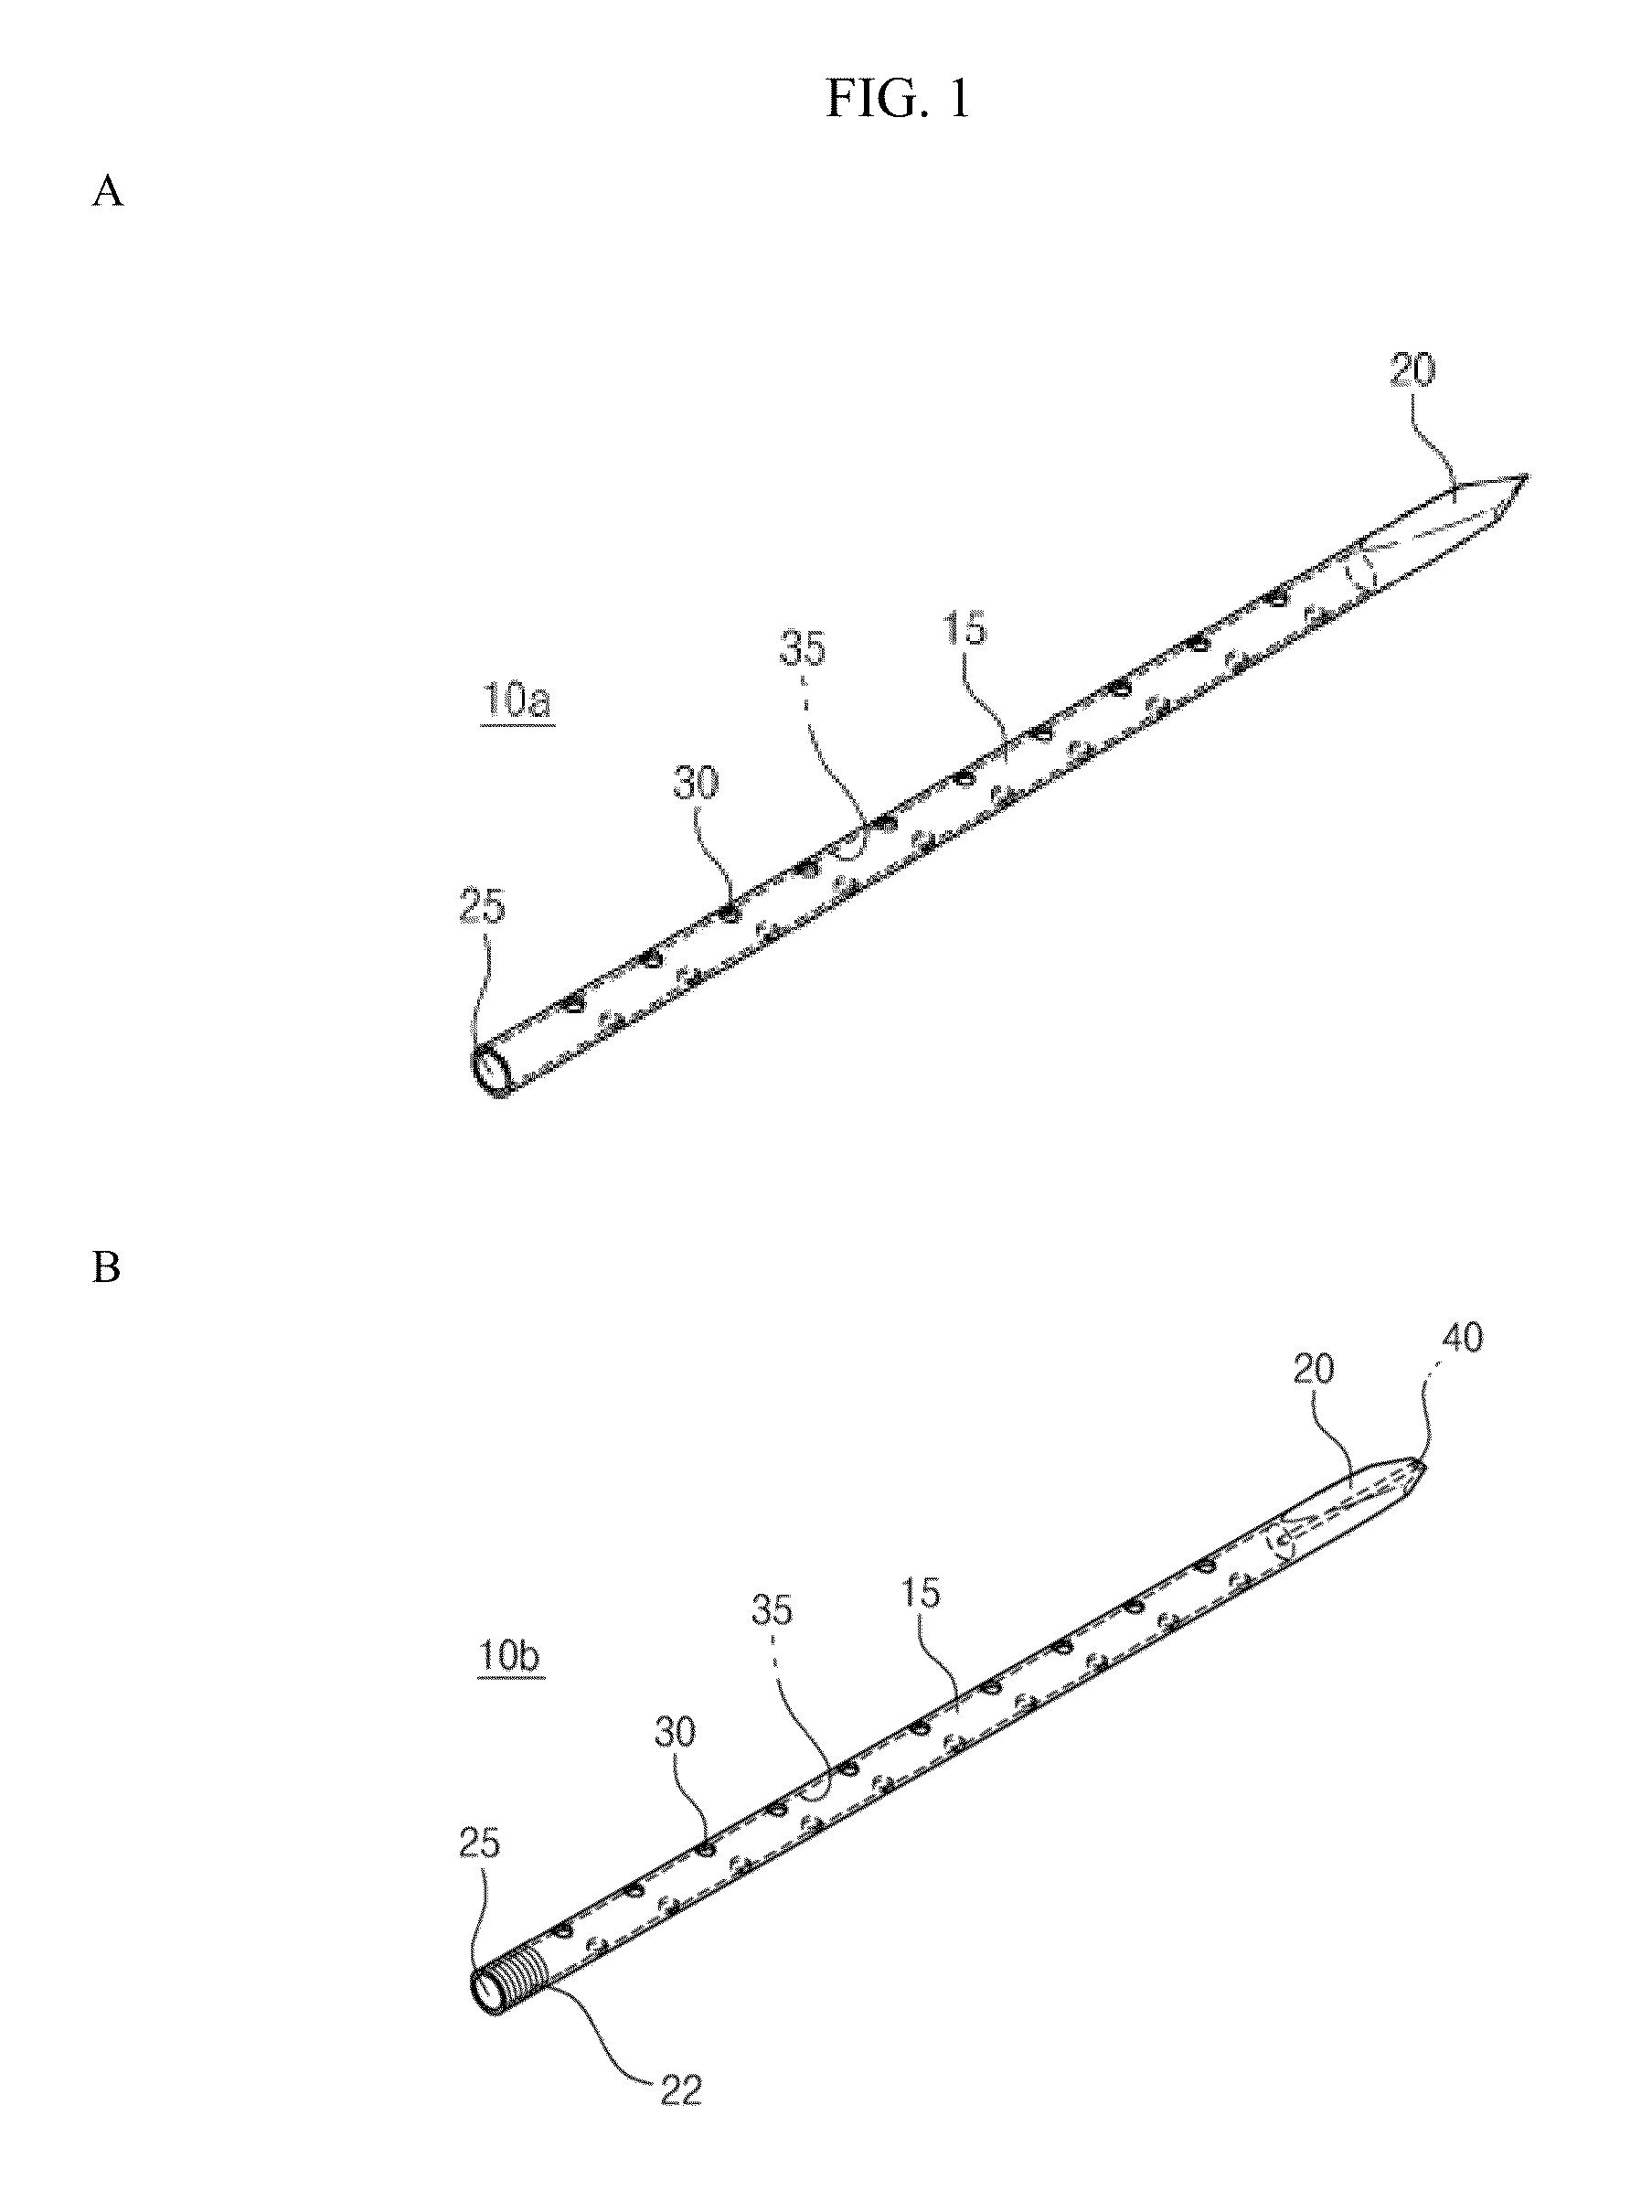 Pin assembly for operation capable of introducing drug